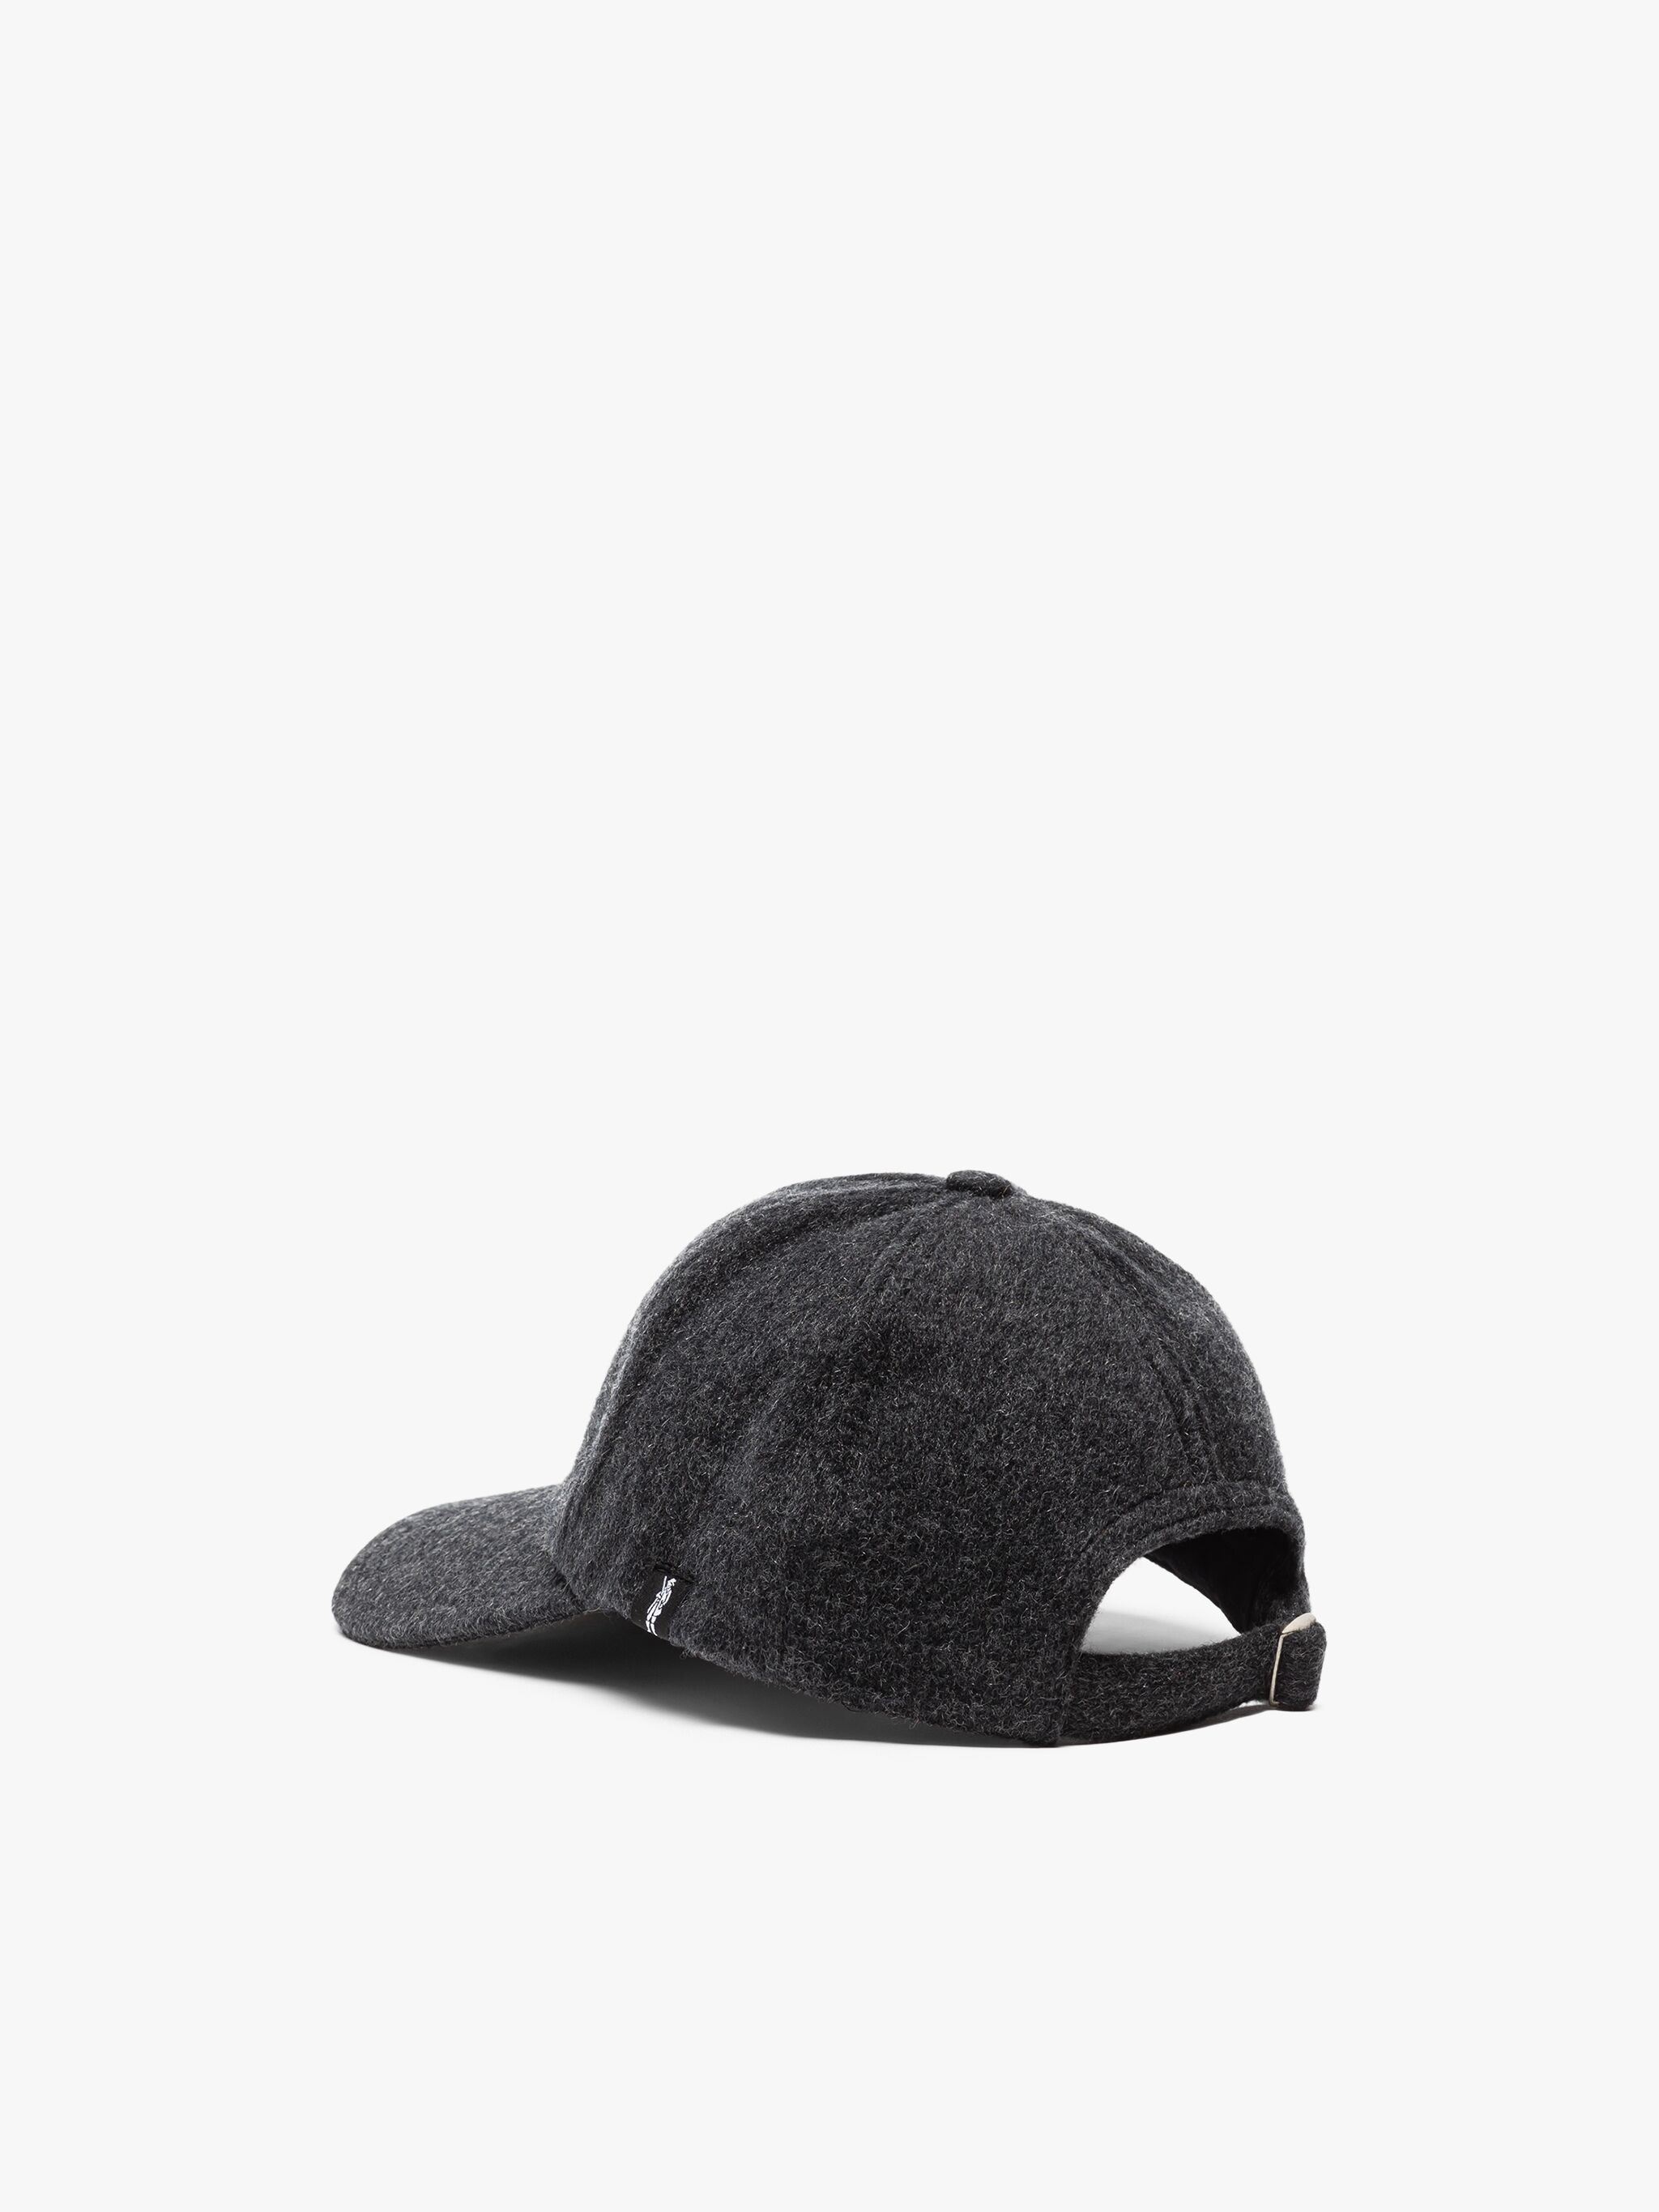 TIPPING CHARCOAL WOOL & CASHMERE BASEBALL CAP - 2